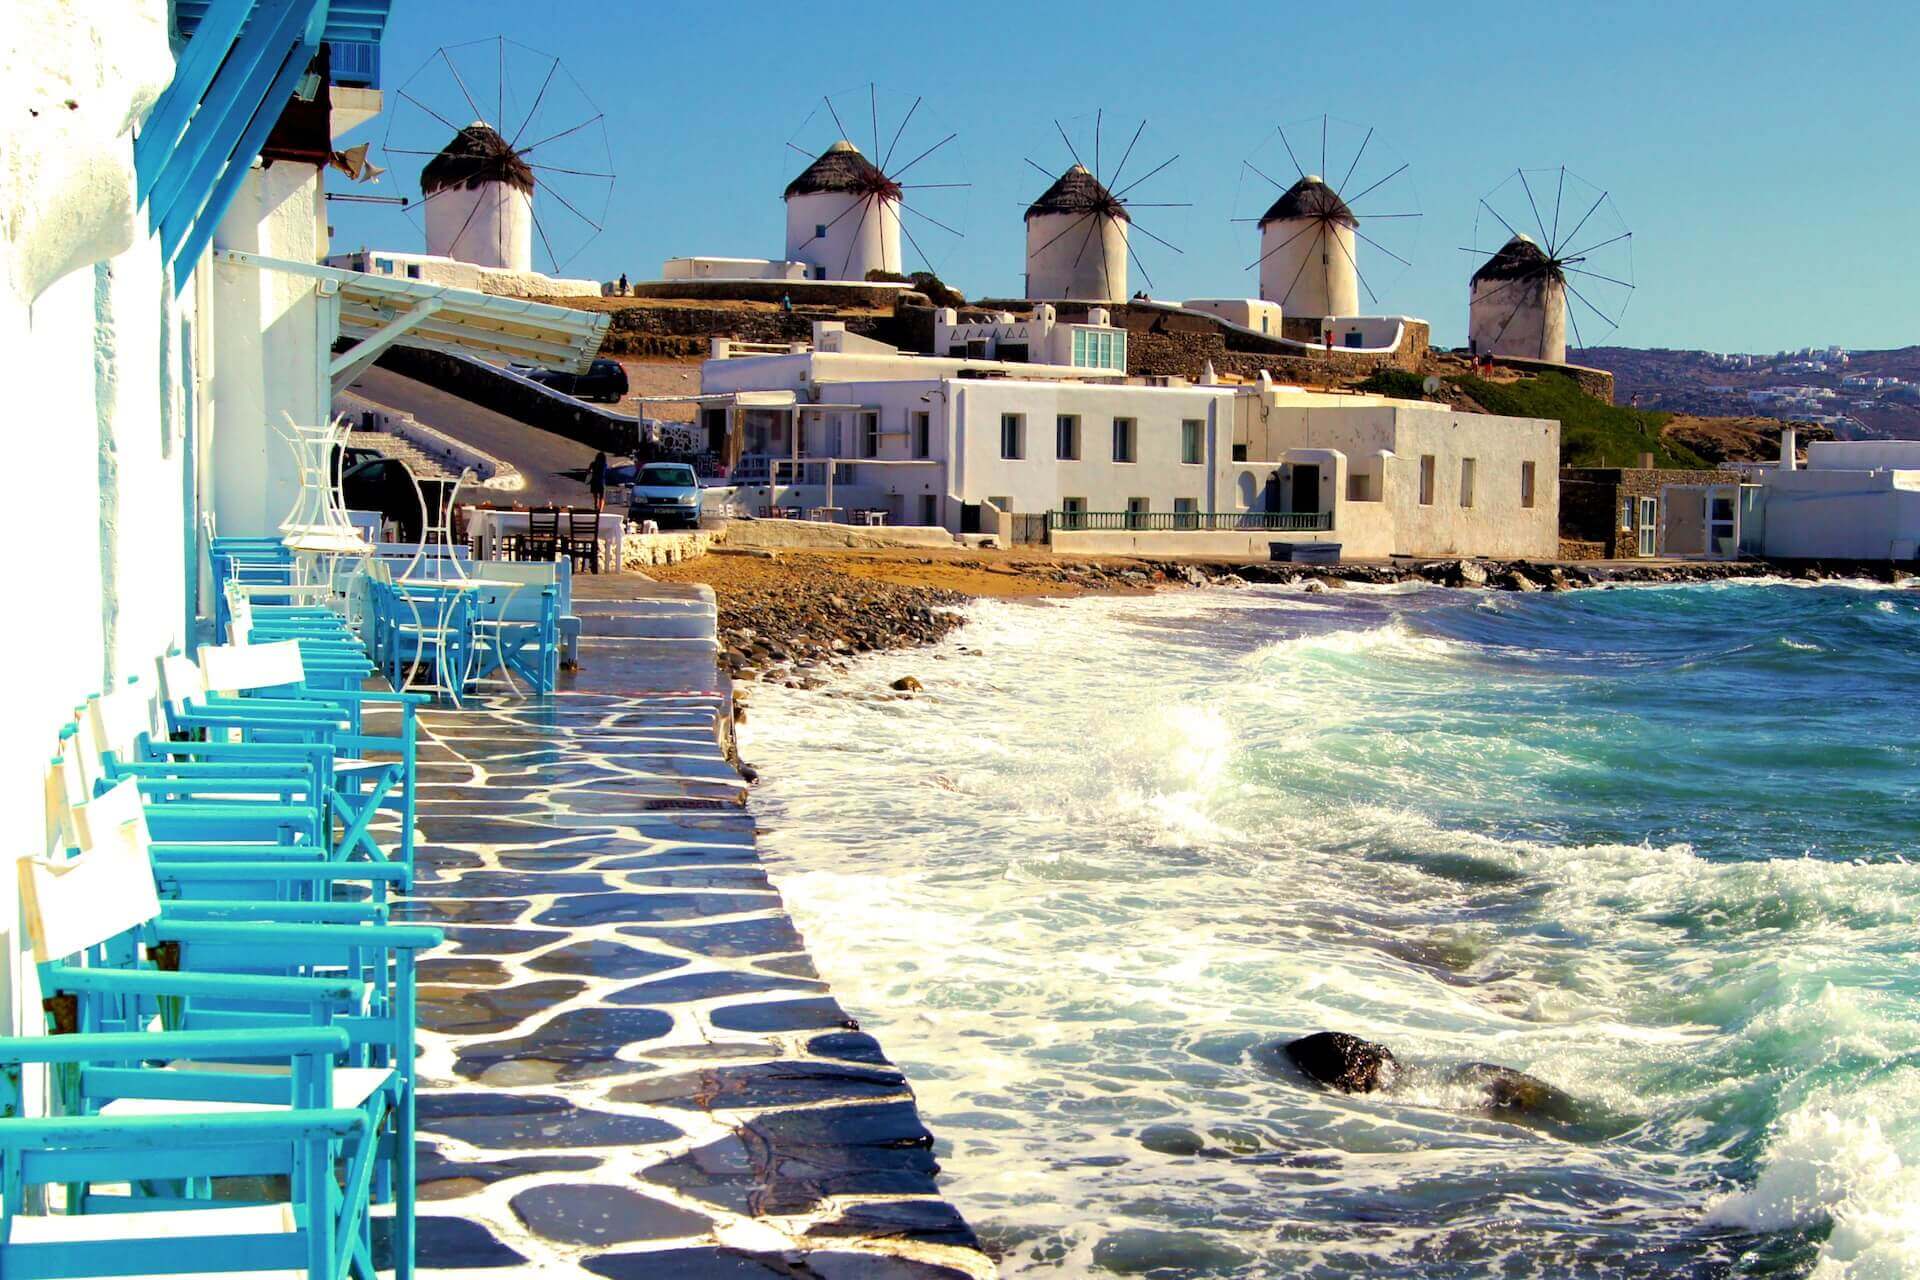 The view of Little Venice and windmills in Mykonos town